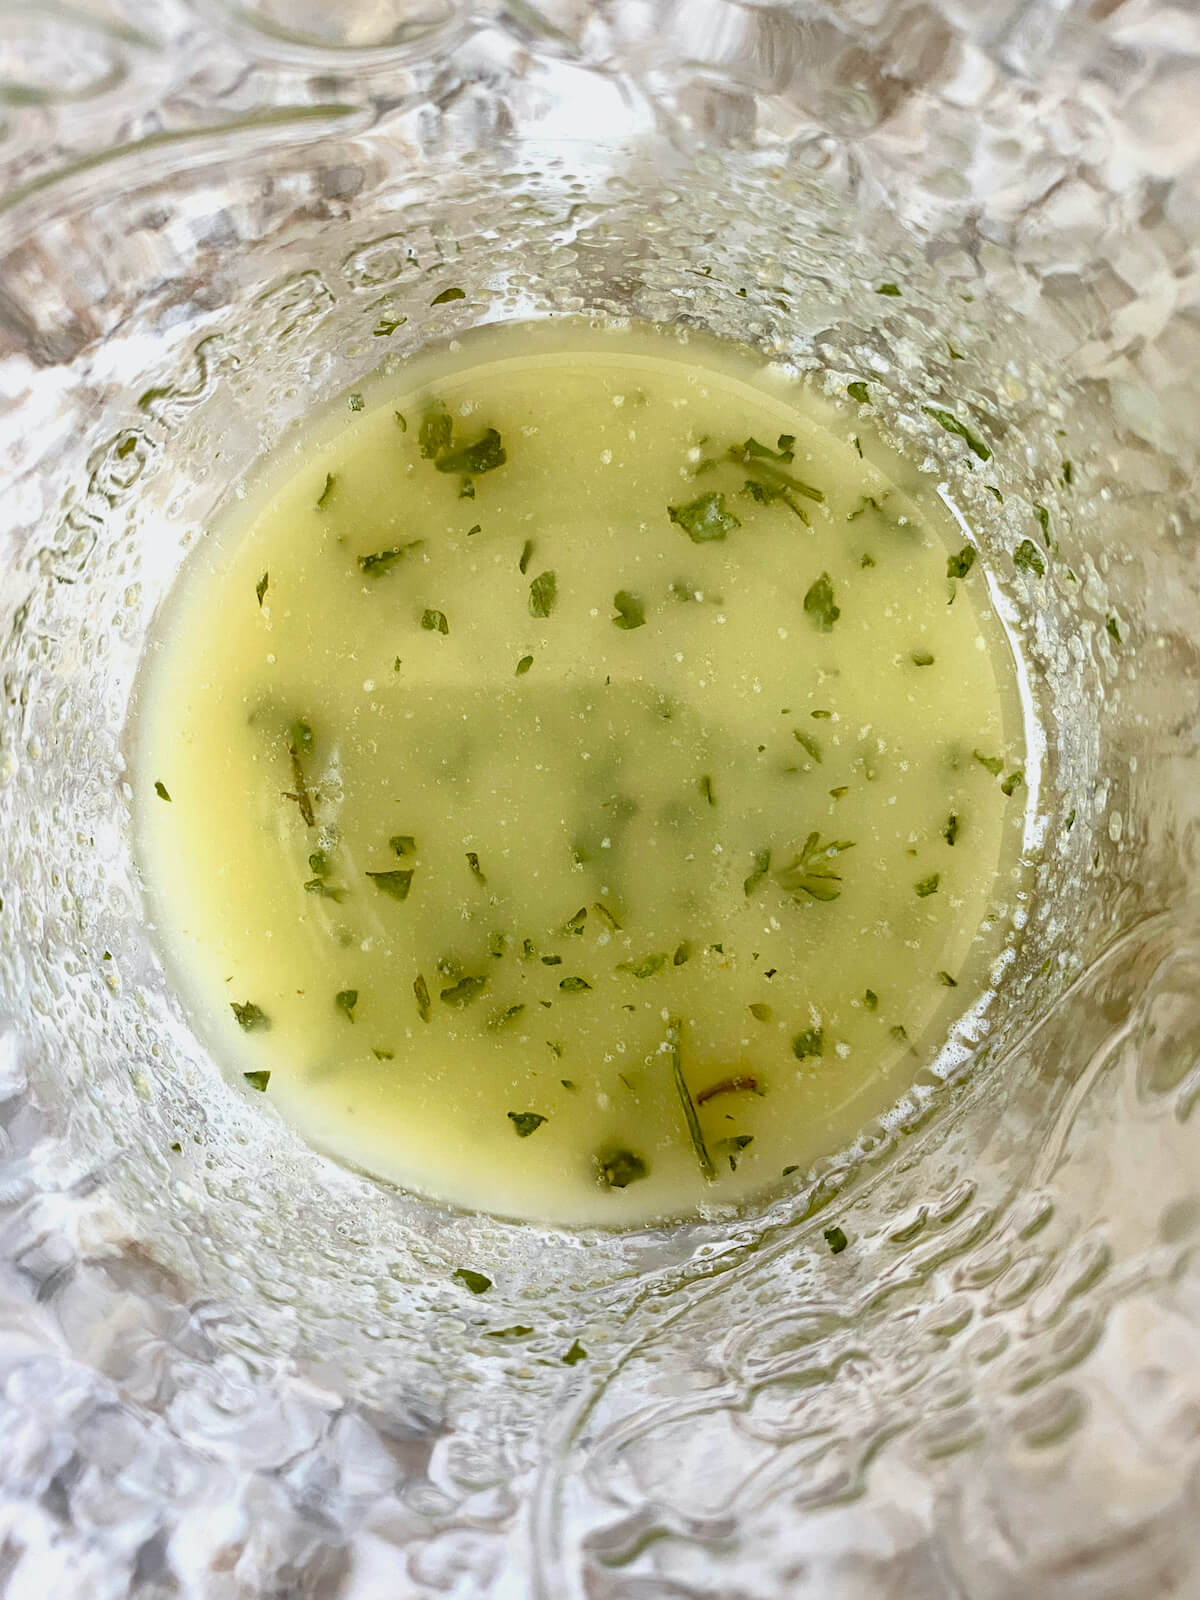 Melted butter, dried herbs, salt, and garlic powder mixed together in a glass jar.